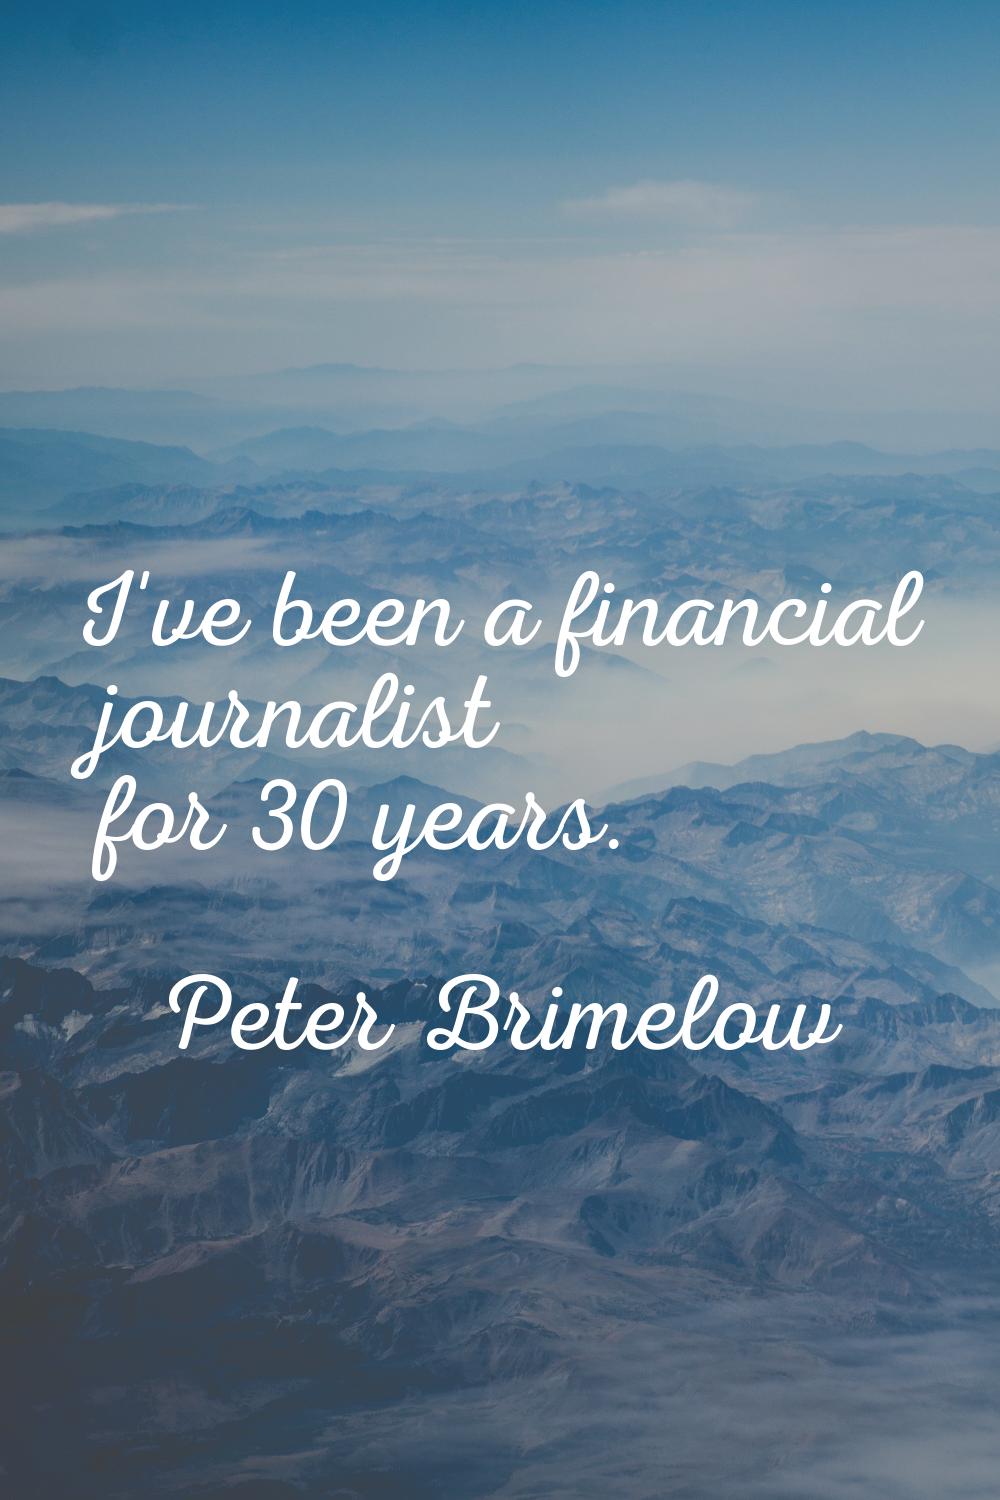 I've been a financial journalist for 30 years.